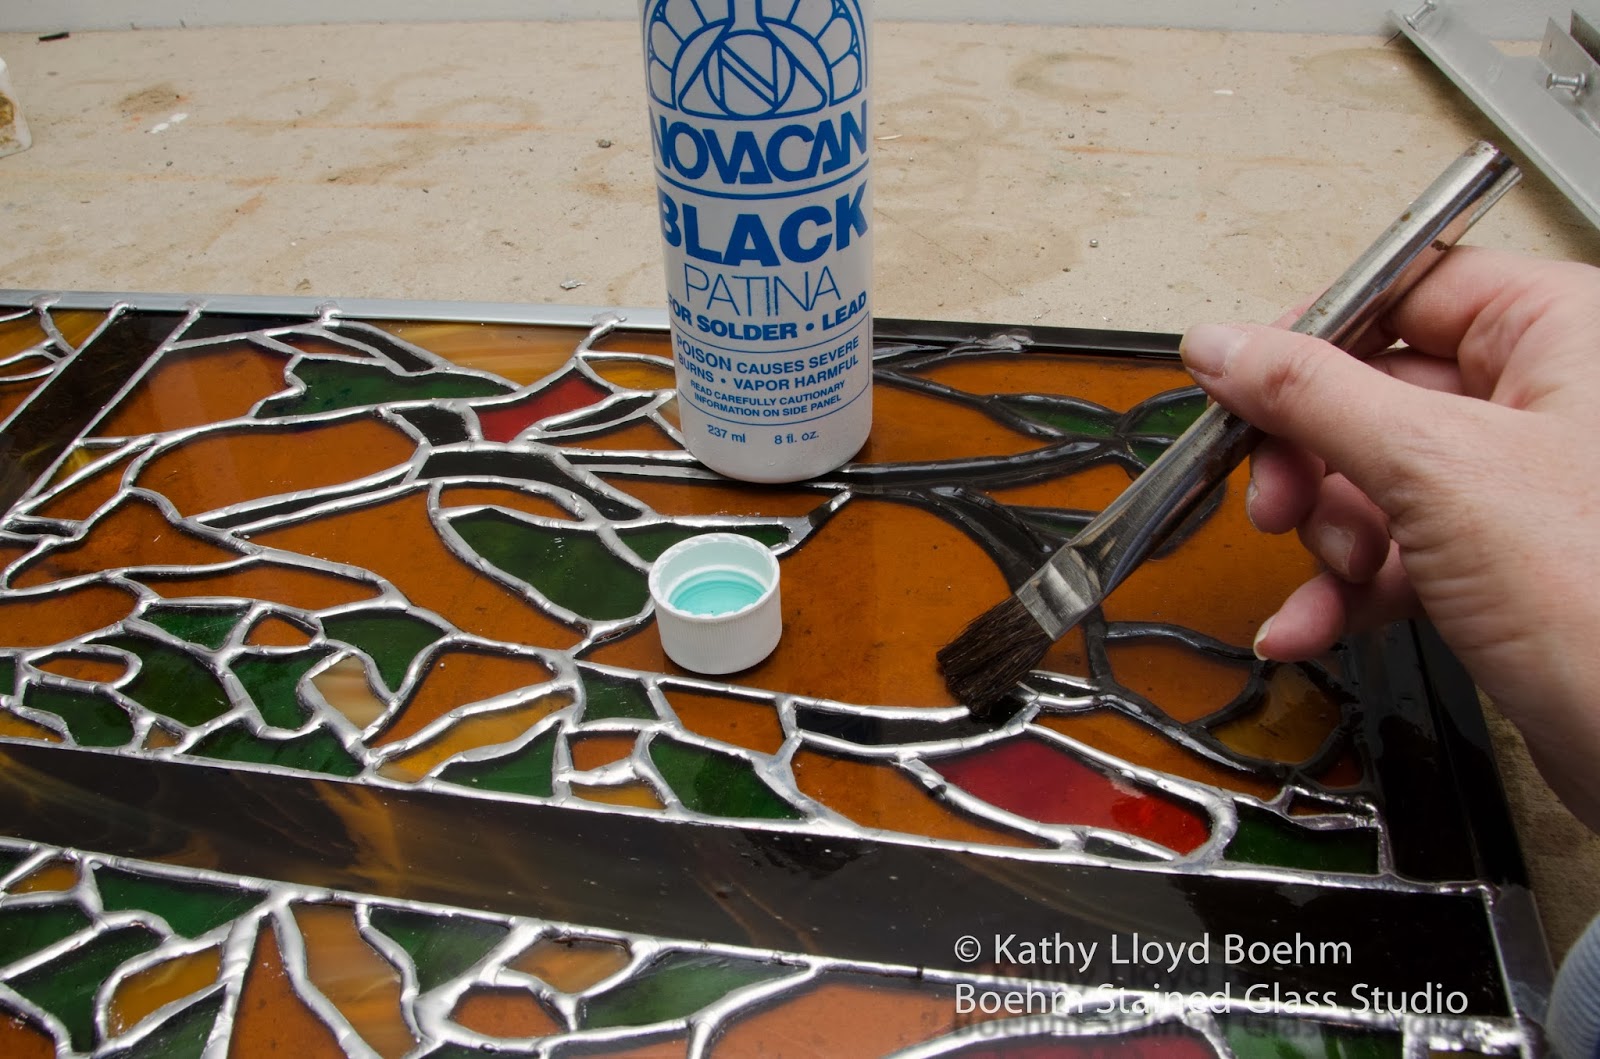 stained glass how to 001b wash off black patina 